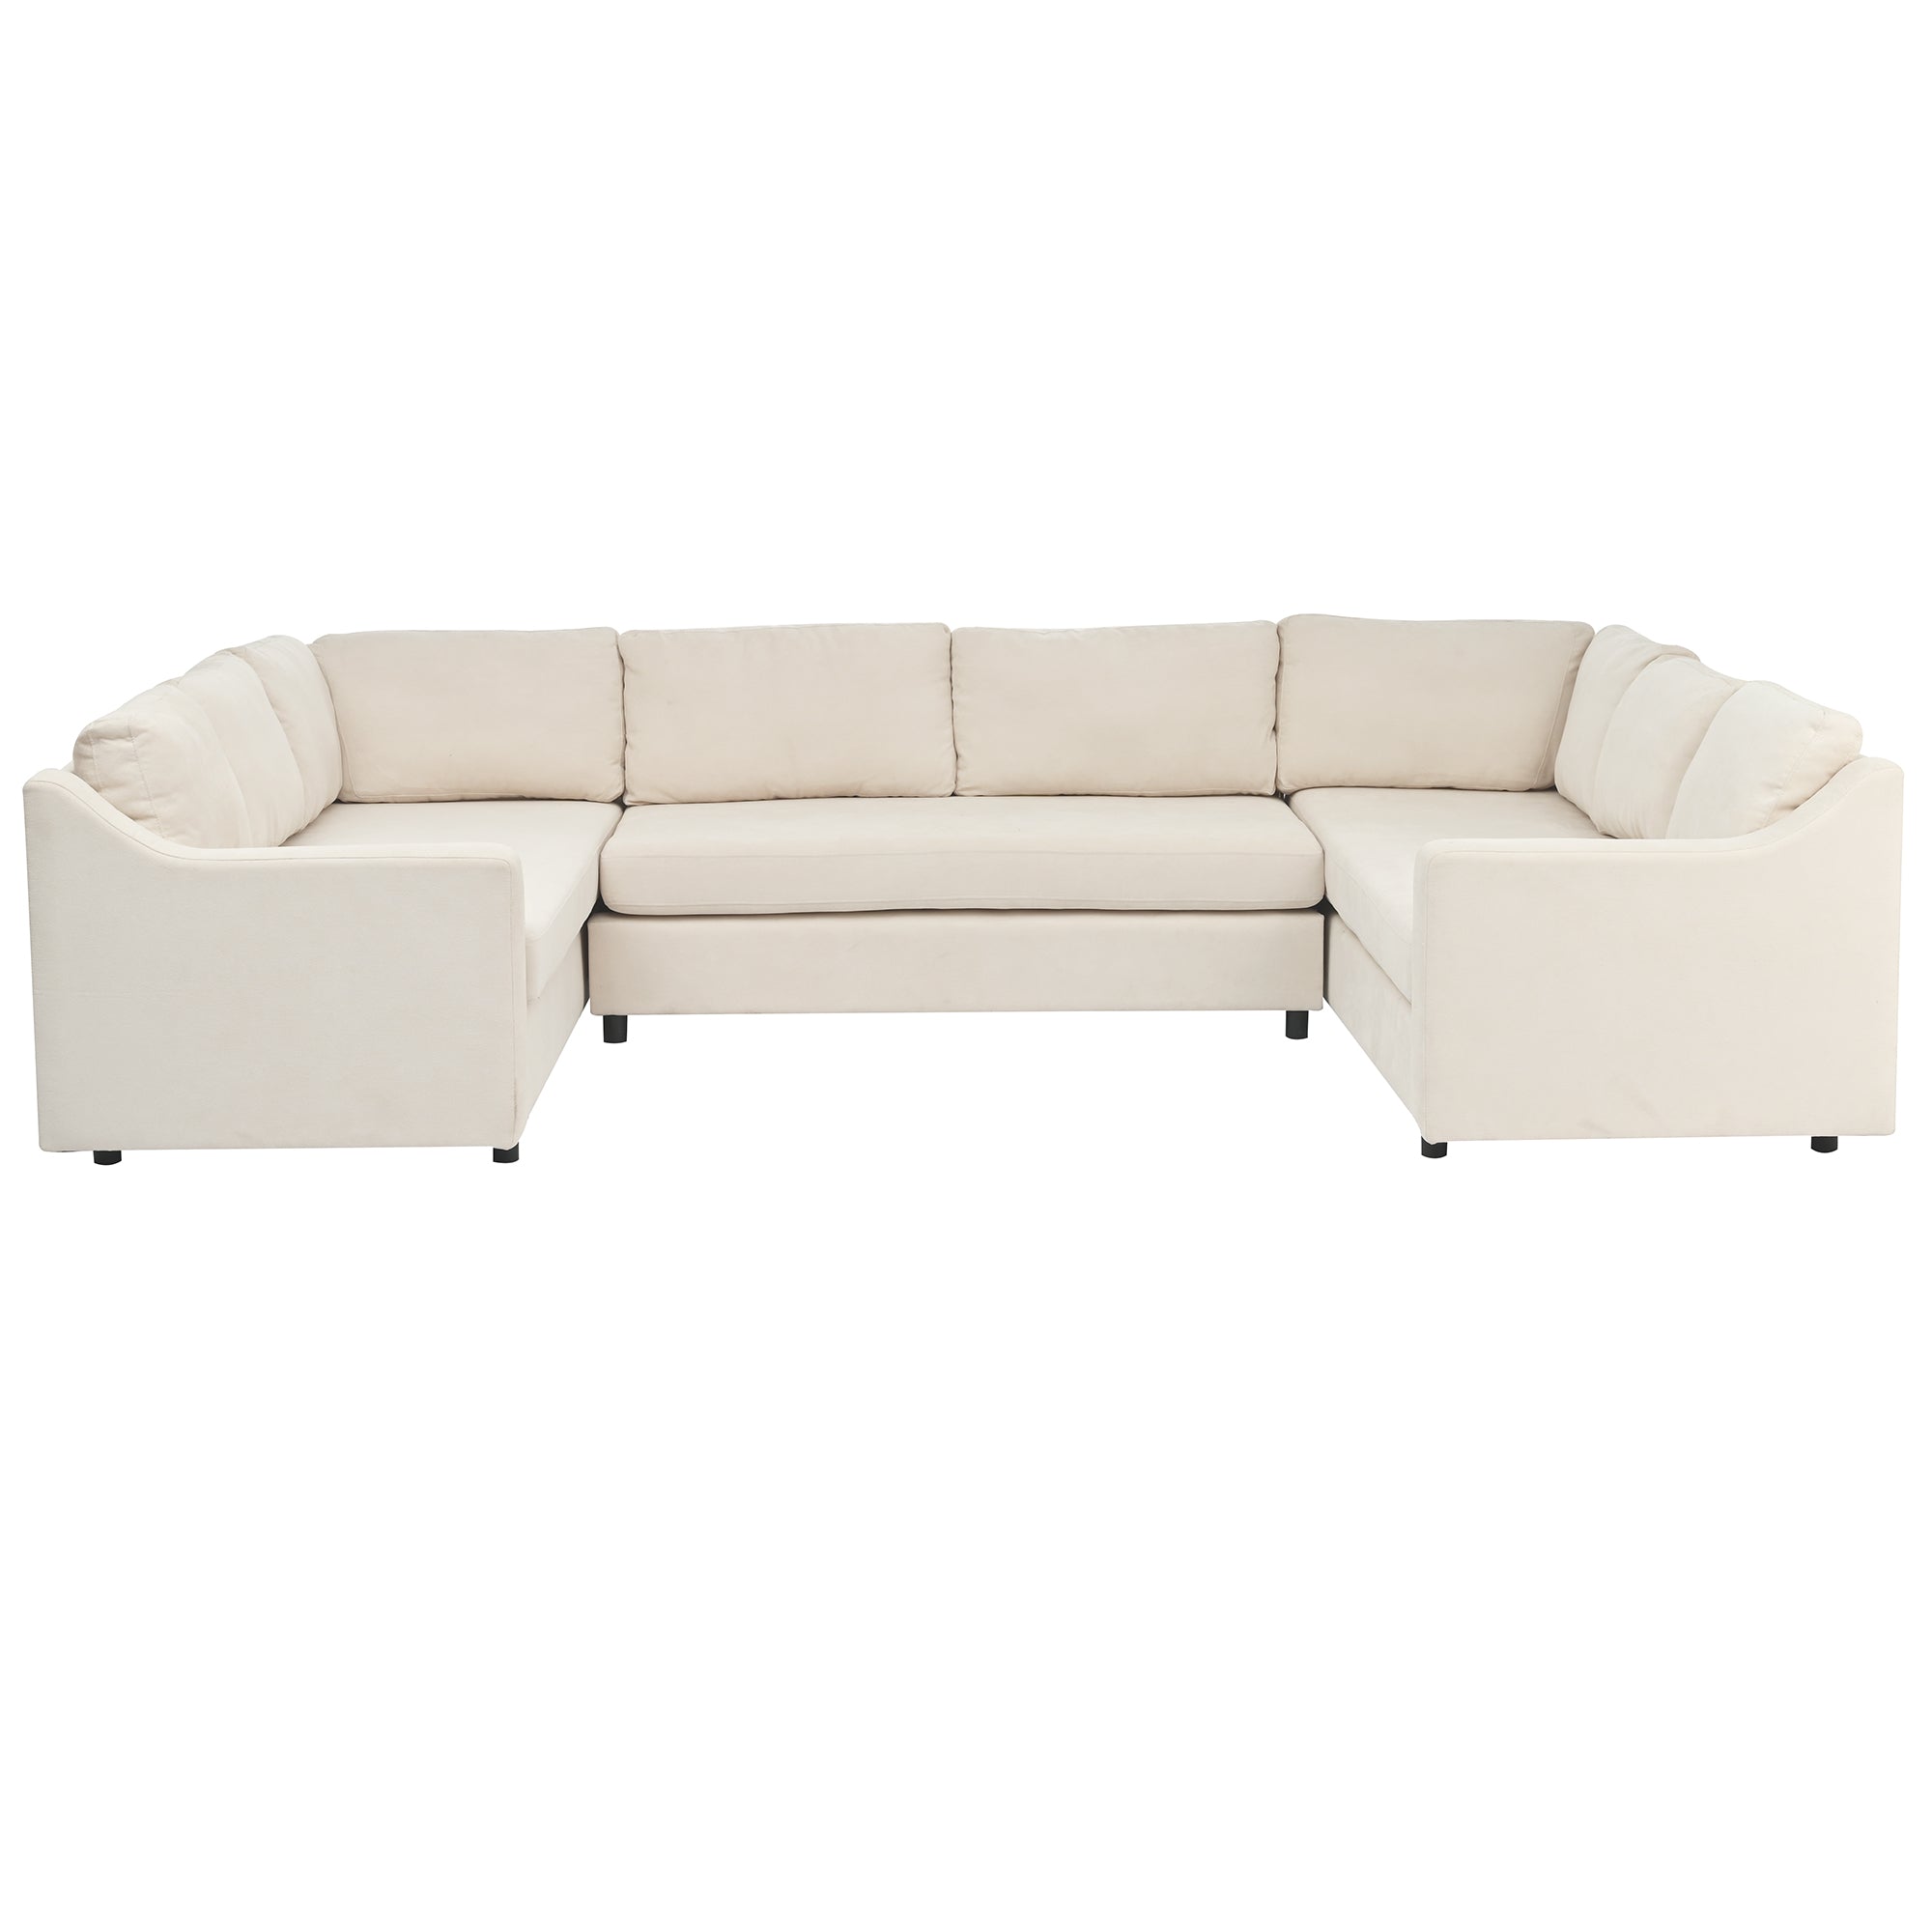 Bellemave 117" 3 Pieces Upholstered U-Shaped Large Sectional Sofa with Thick Seat and Back cushions